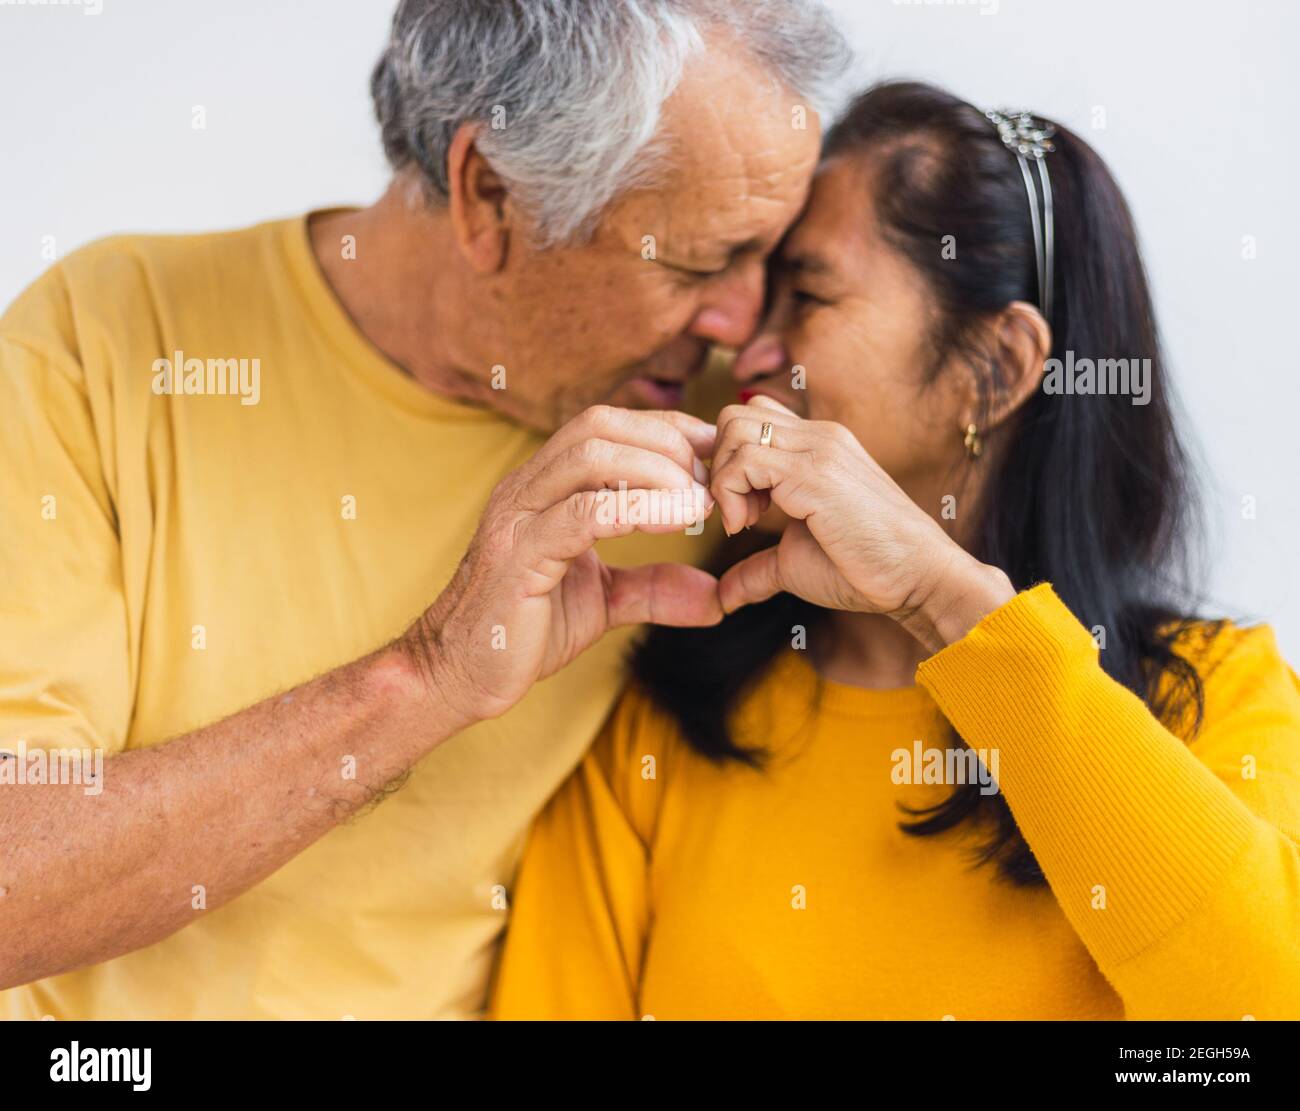 Unrecognizable old couple doing a heart with their hands while kissing Stock Photo